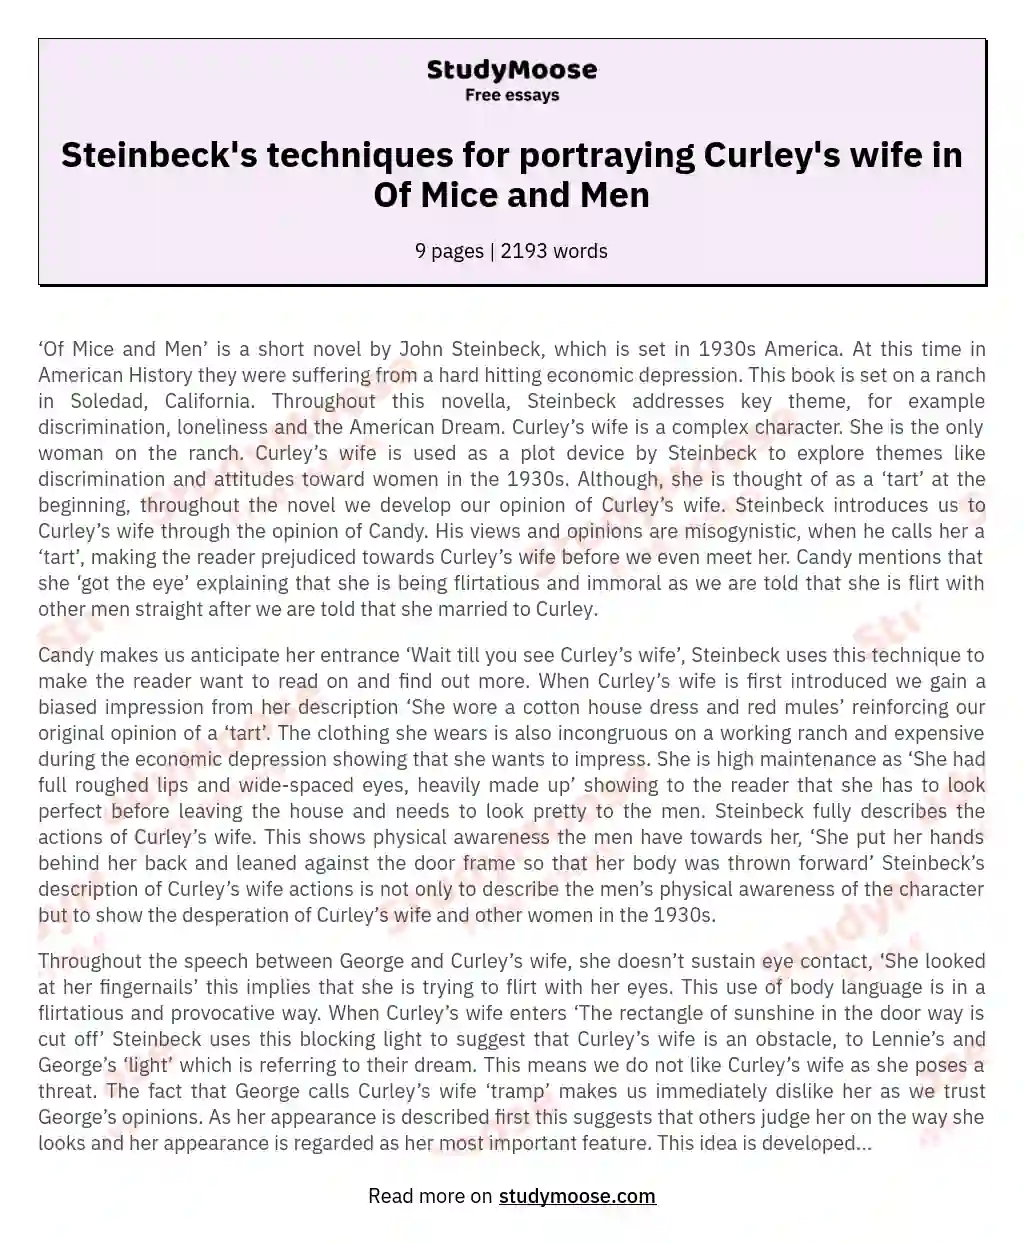 The ways Steinbeck creates dislike of and sympathy for Curley’s wife in his novel "Of Mice and Men"